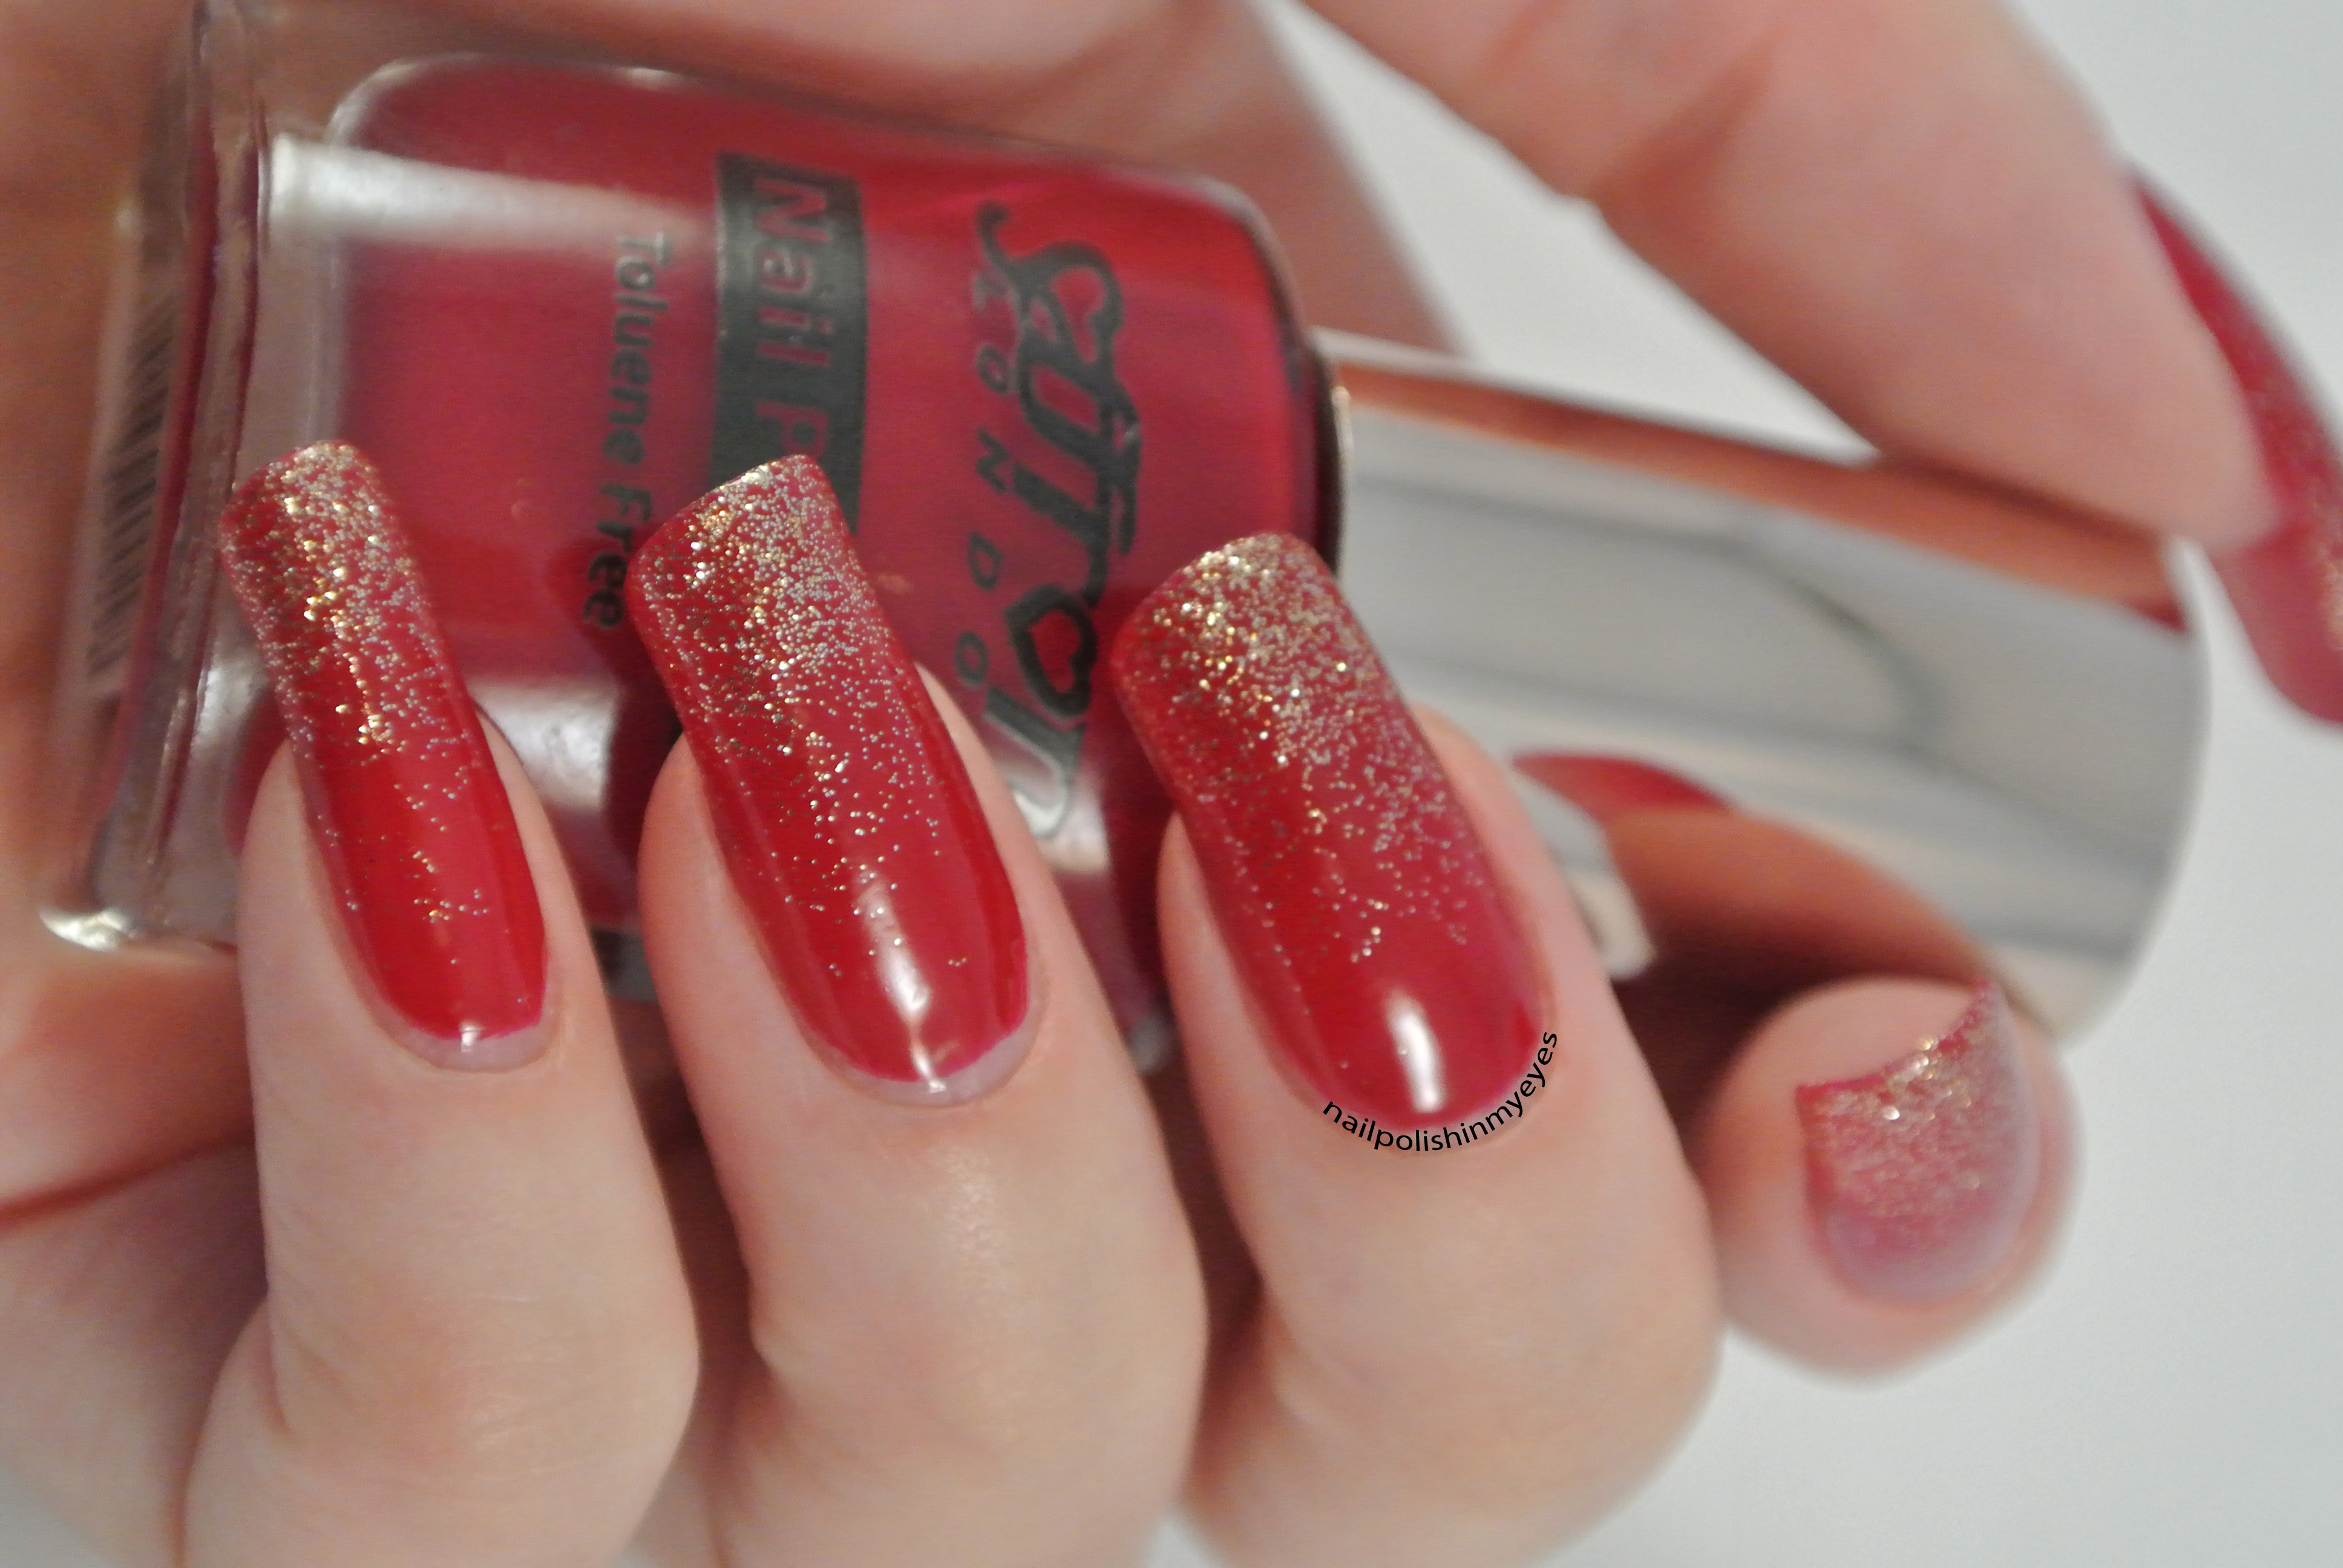 2. Red and Gold Glitter Nail Art - wide 4